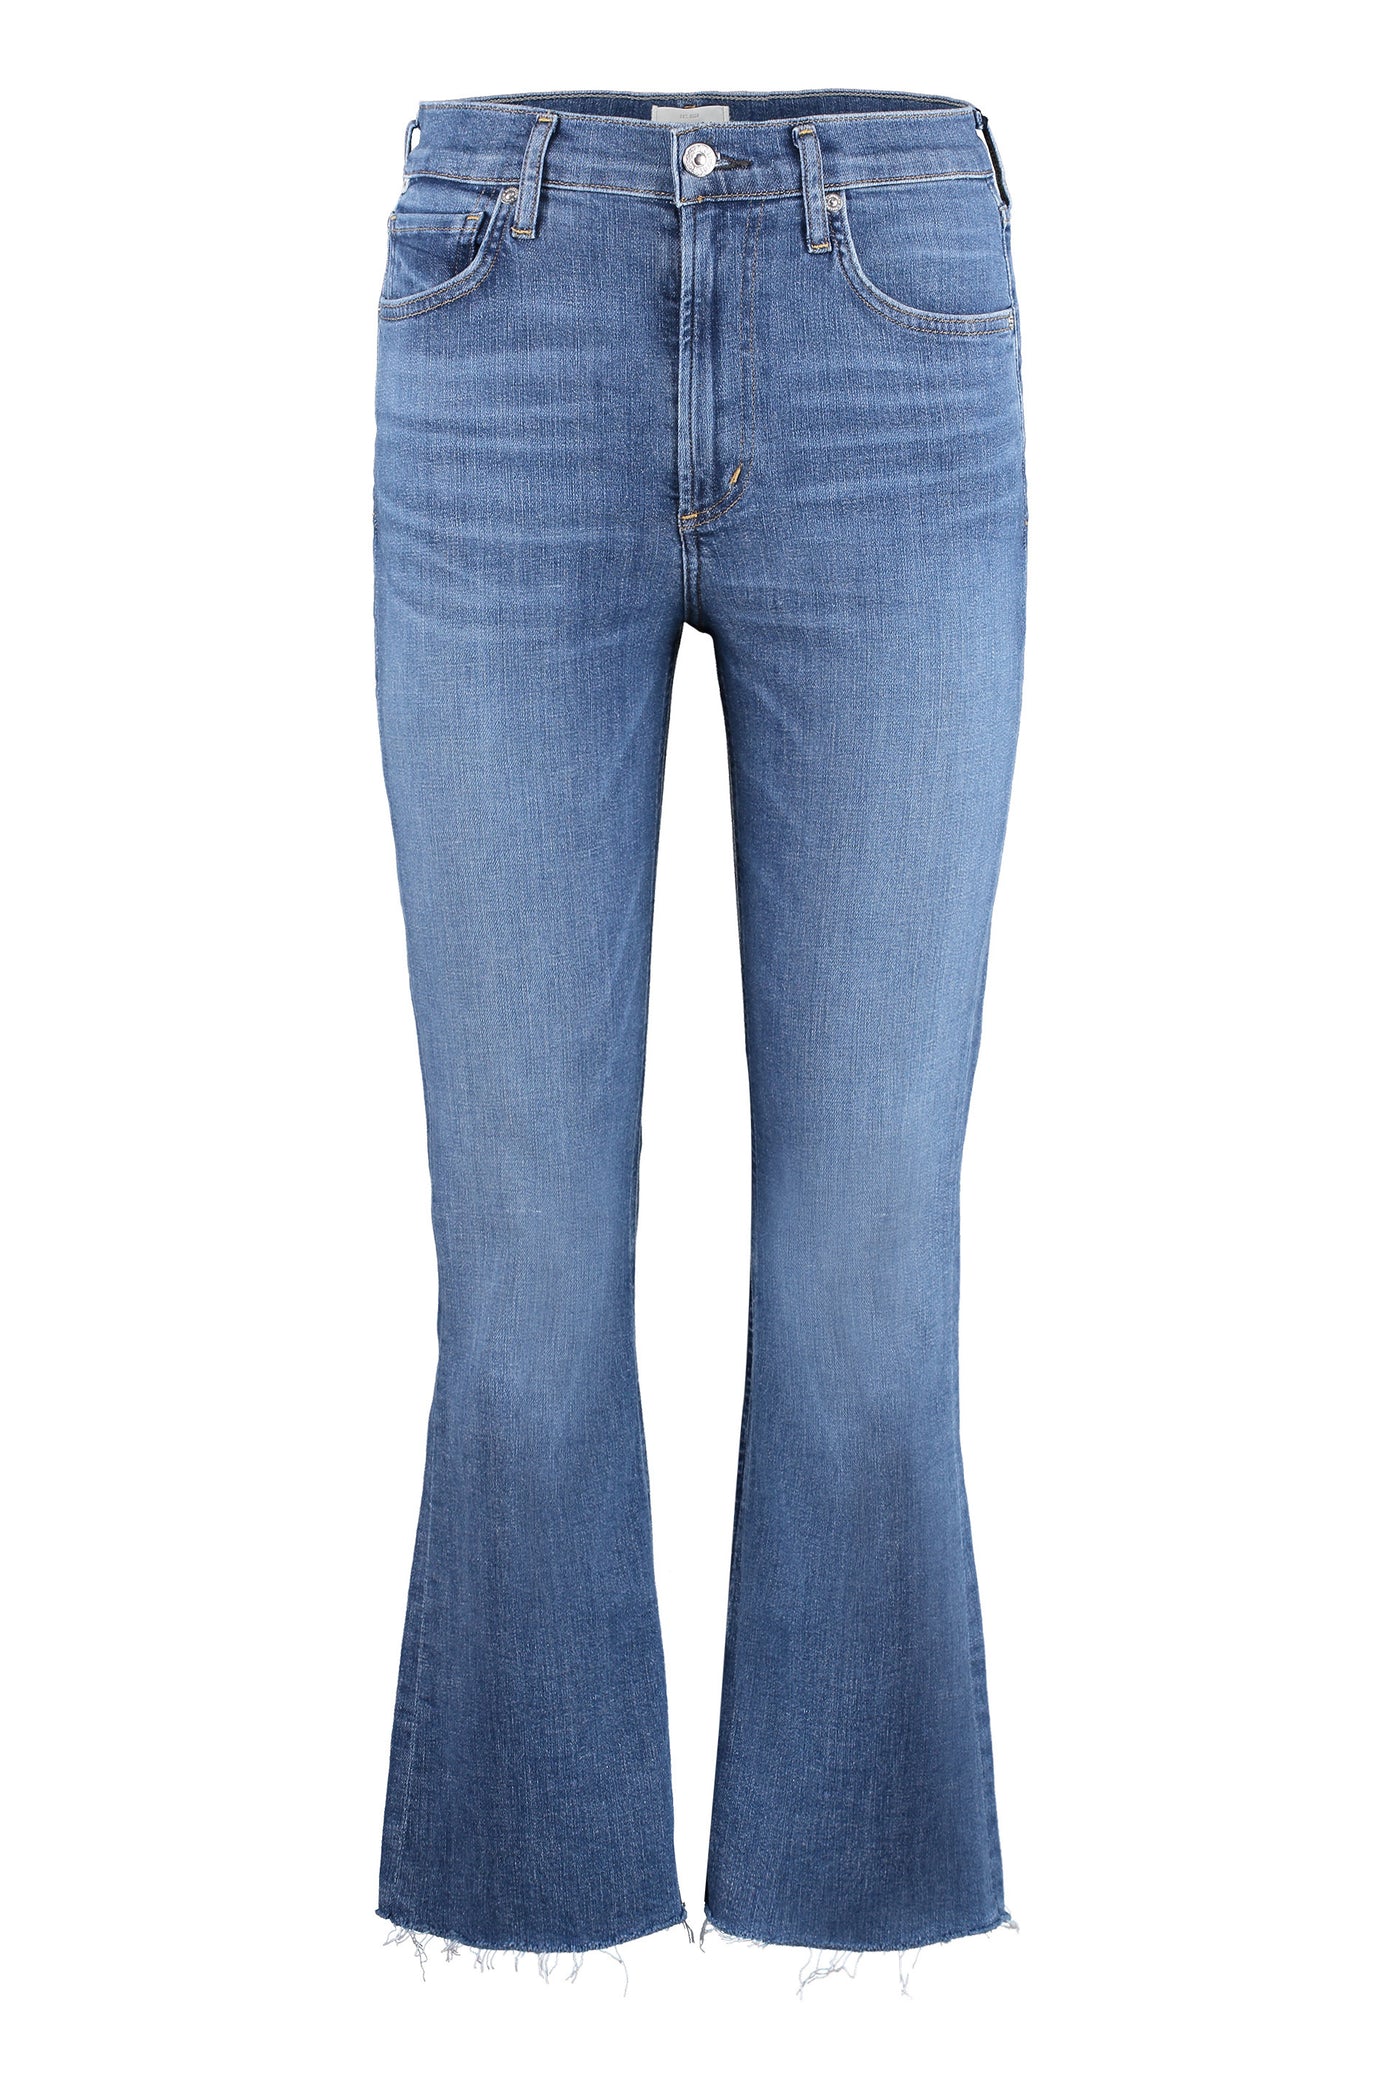 LLESS CITIZENS OF HUMANITY ISOLA CROPPED JEANS